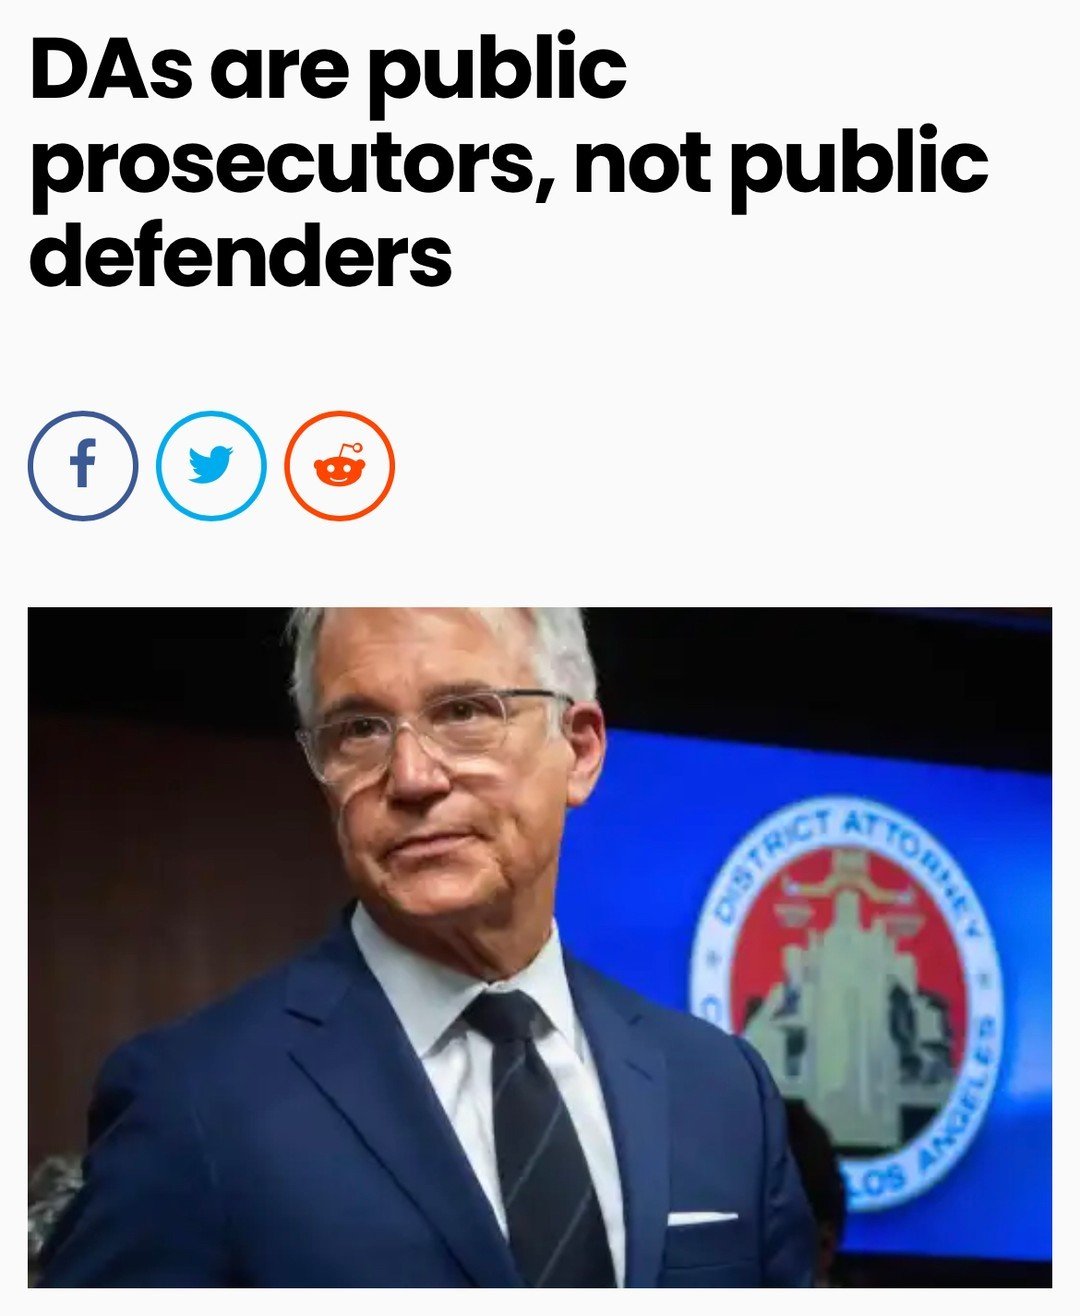 "The role of district attorneys in our criminal-justice system is to prosecute people who commit crimes."

George Gascon advances the interests of criminals, not the interests of the public he is sworn to protect. This is disqualifying. He must be recalled.

Sign the petition TODAY
#RecallDAGeorgeGascon